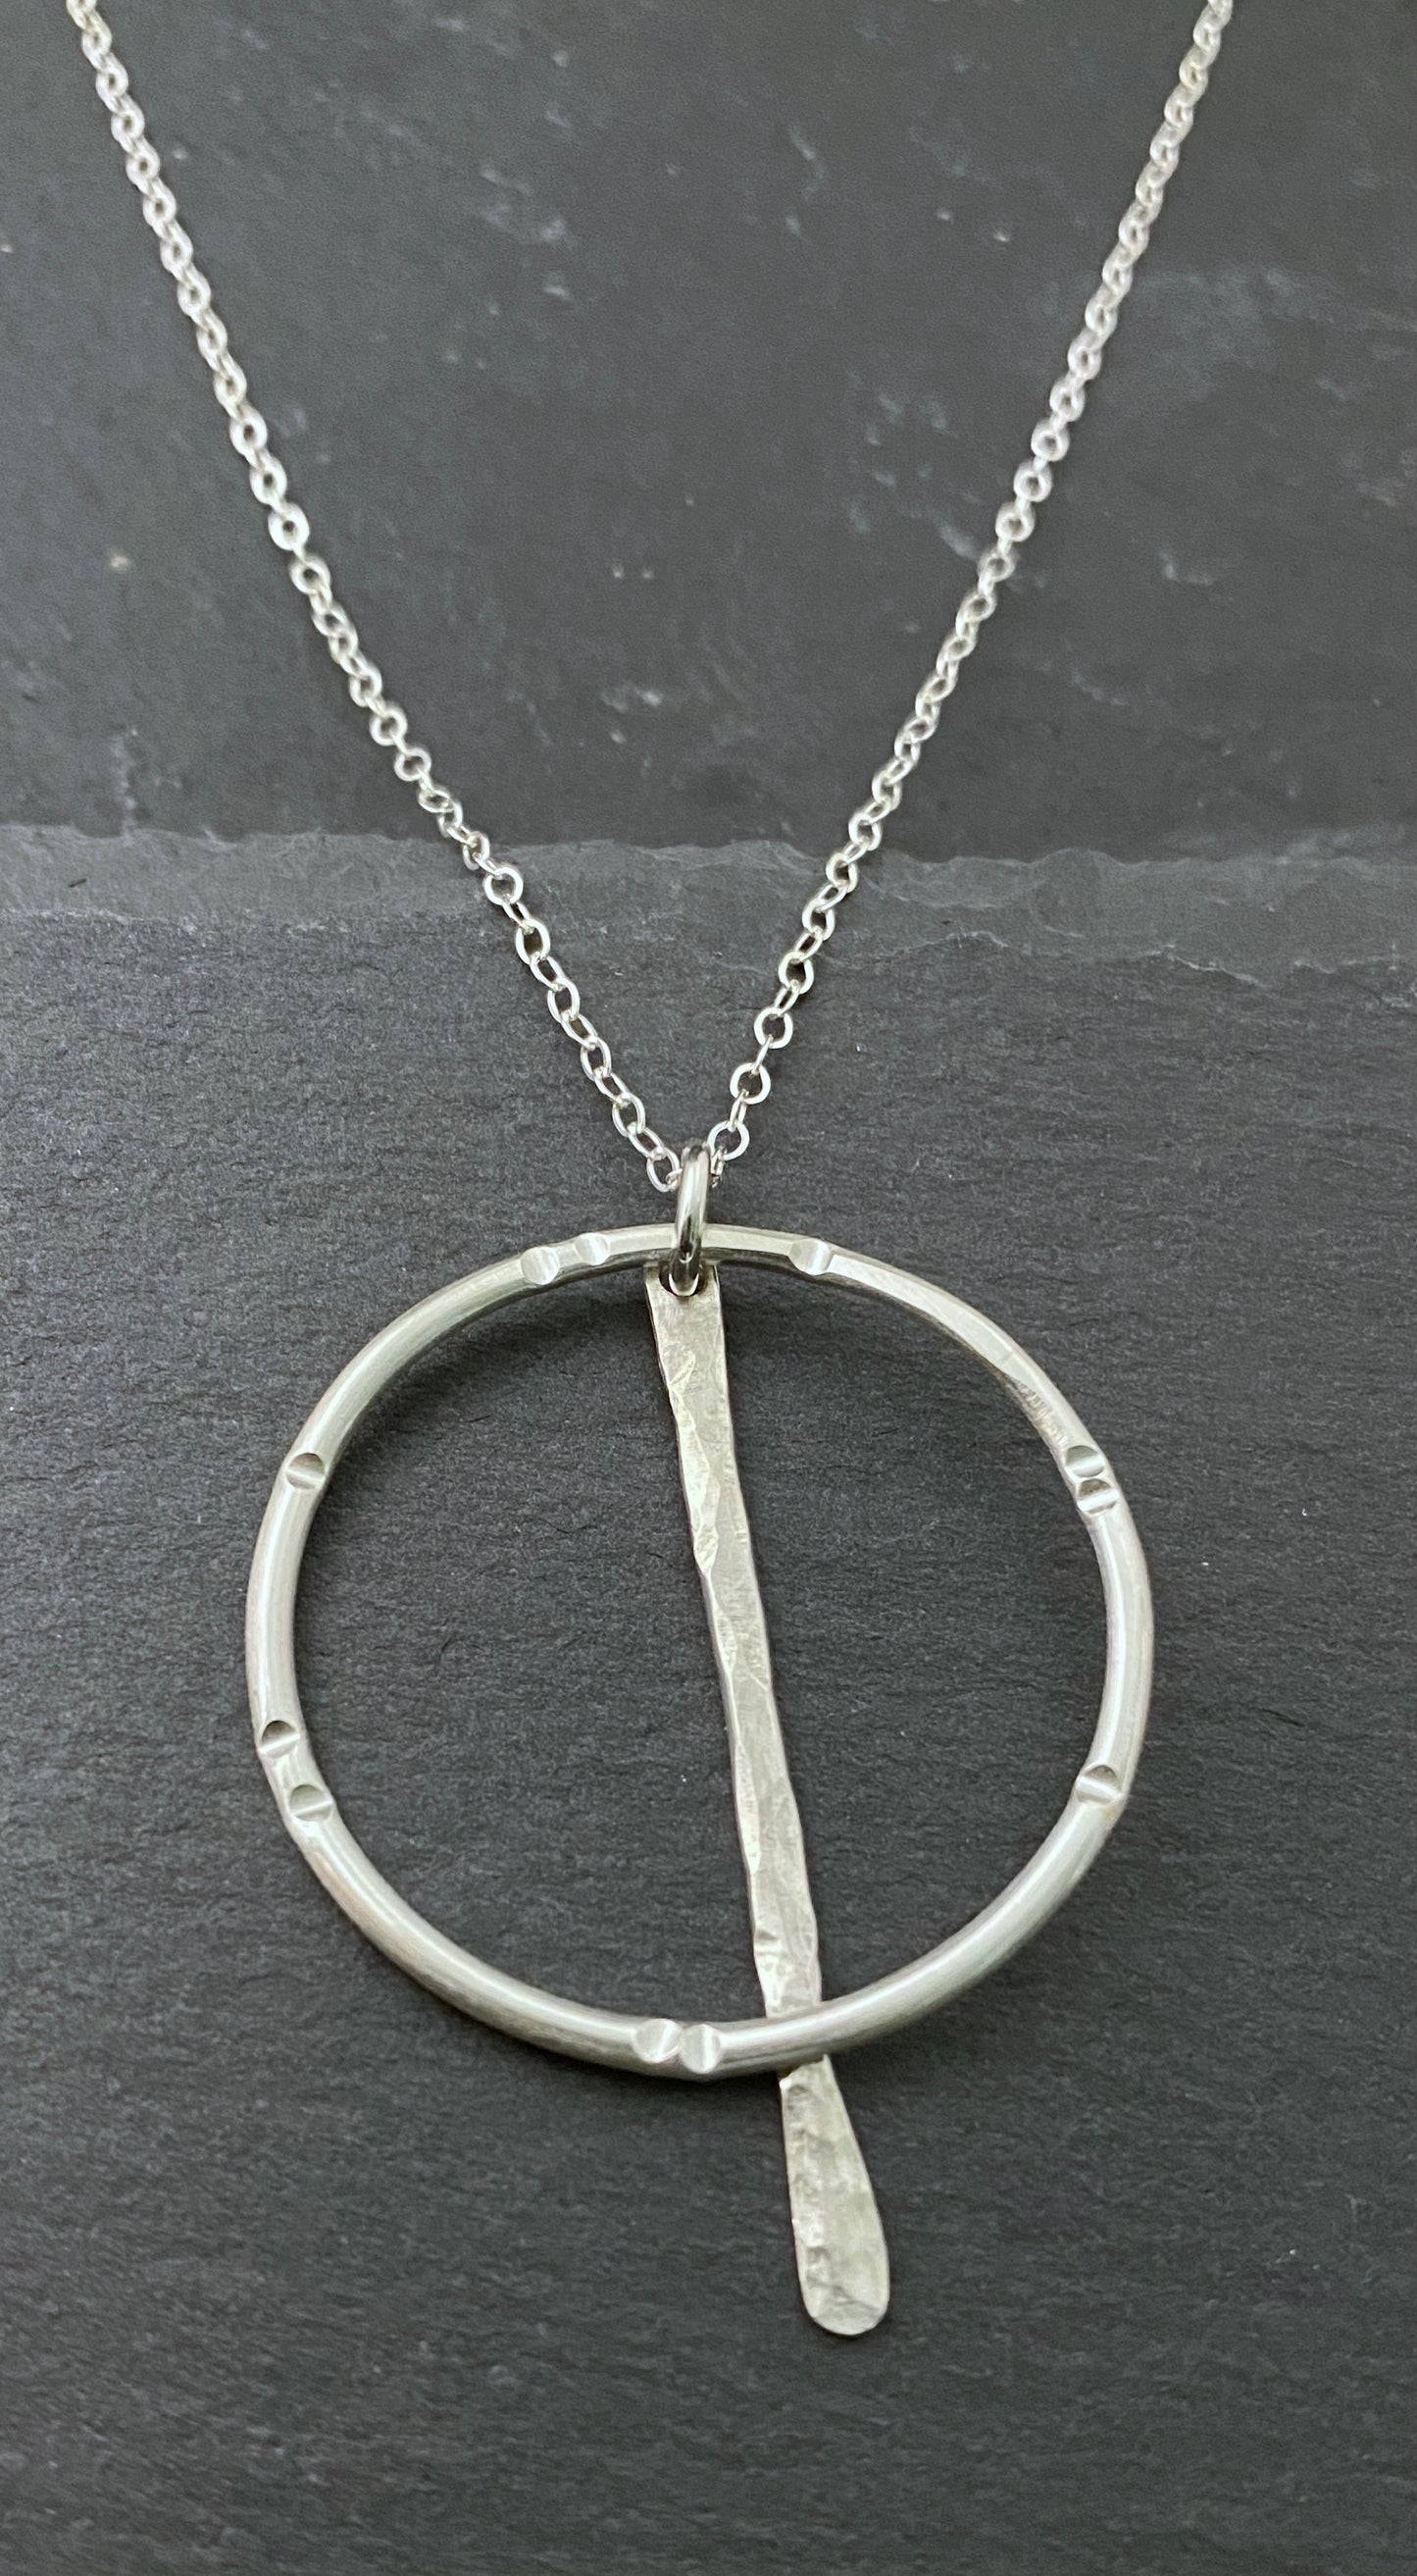 Sterling silver forged hoop necklace with paddle